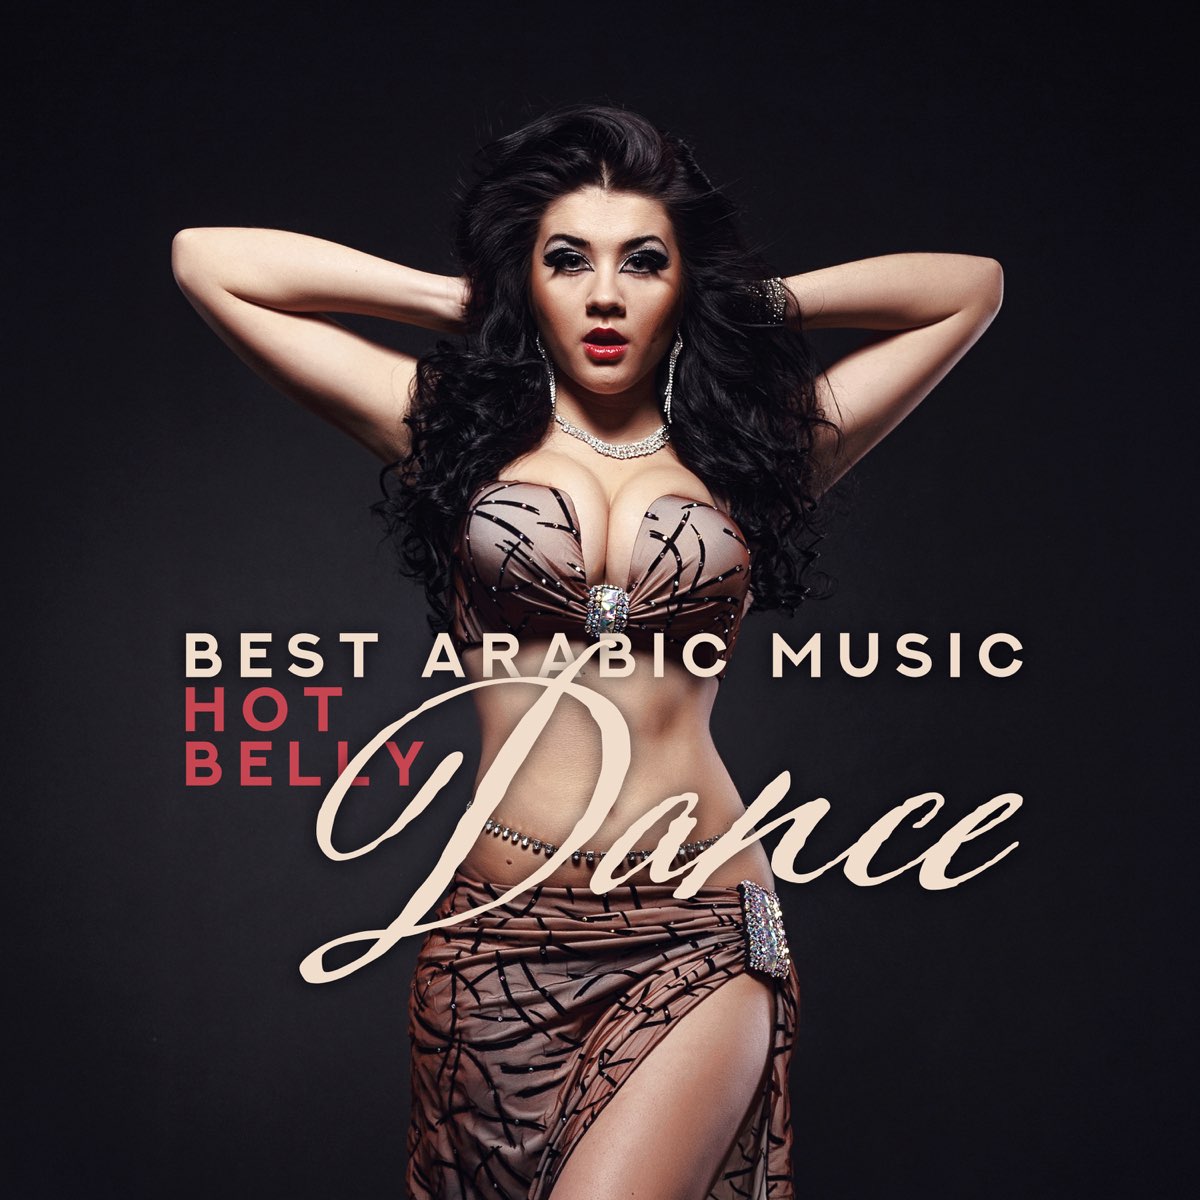 Best Arabic Music: Hot Belly Dance – Oriental Dance Music for Relaxation,  Sexy and Erotic Night - Album by Oriental Music Zone - Apple Music